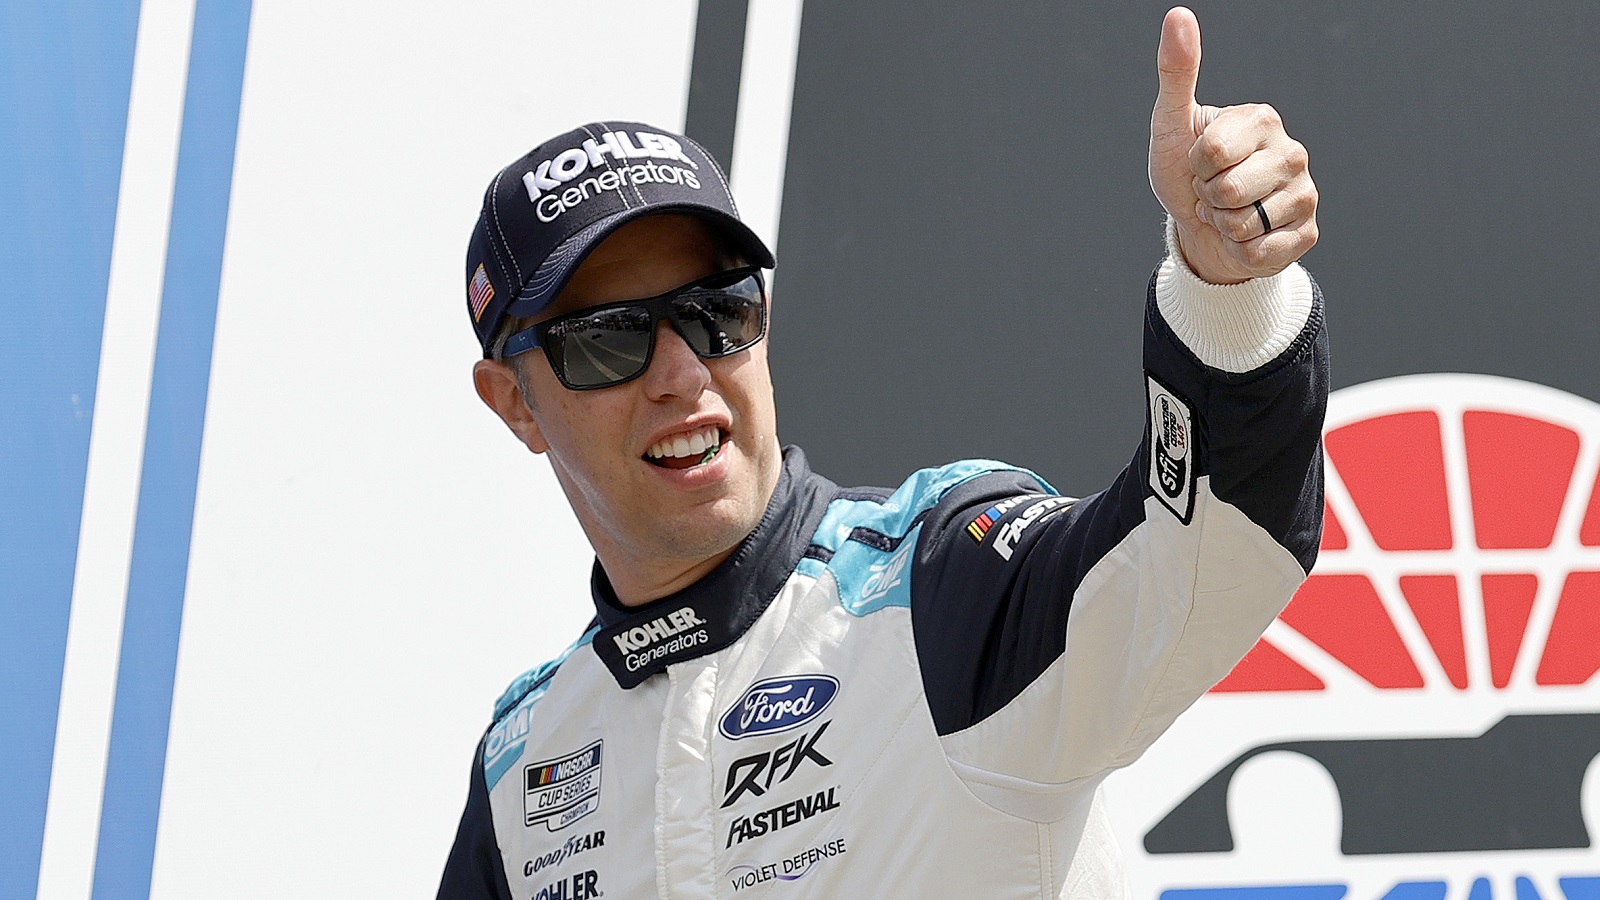 Brad Keselowski gives a thumbs up to fans during driver intros prior to the NASCAR Cup Series Ambetter 301 at New Hampshire Motor Speedway on July 17, 2022. | Tim Nwachukwu/Getty Images